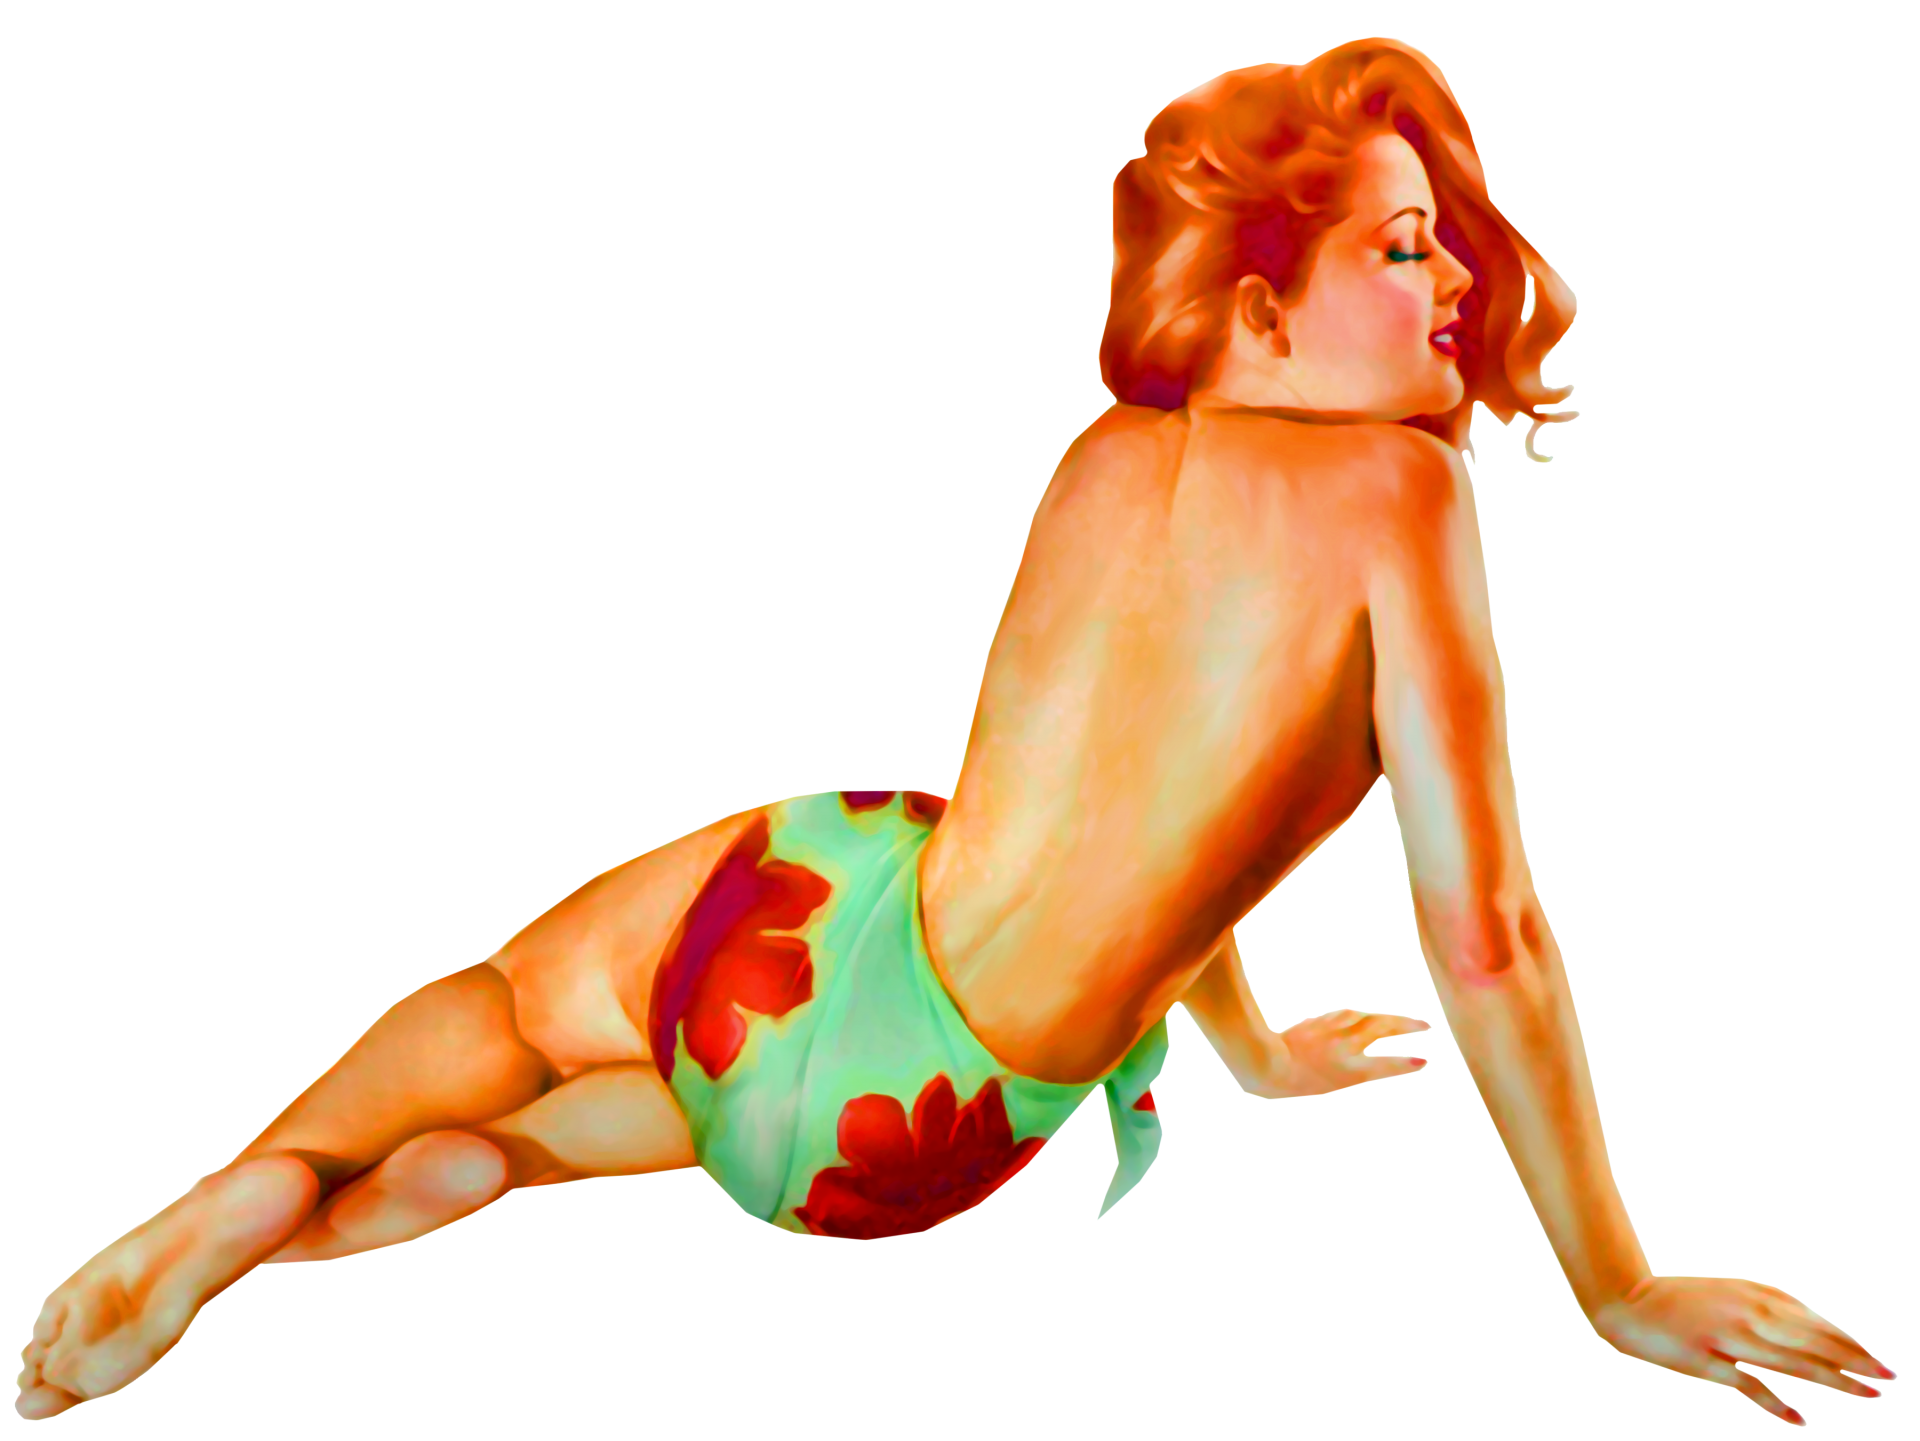 Pin Up Girl 40's-50's